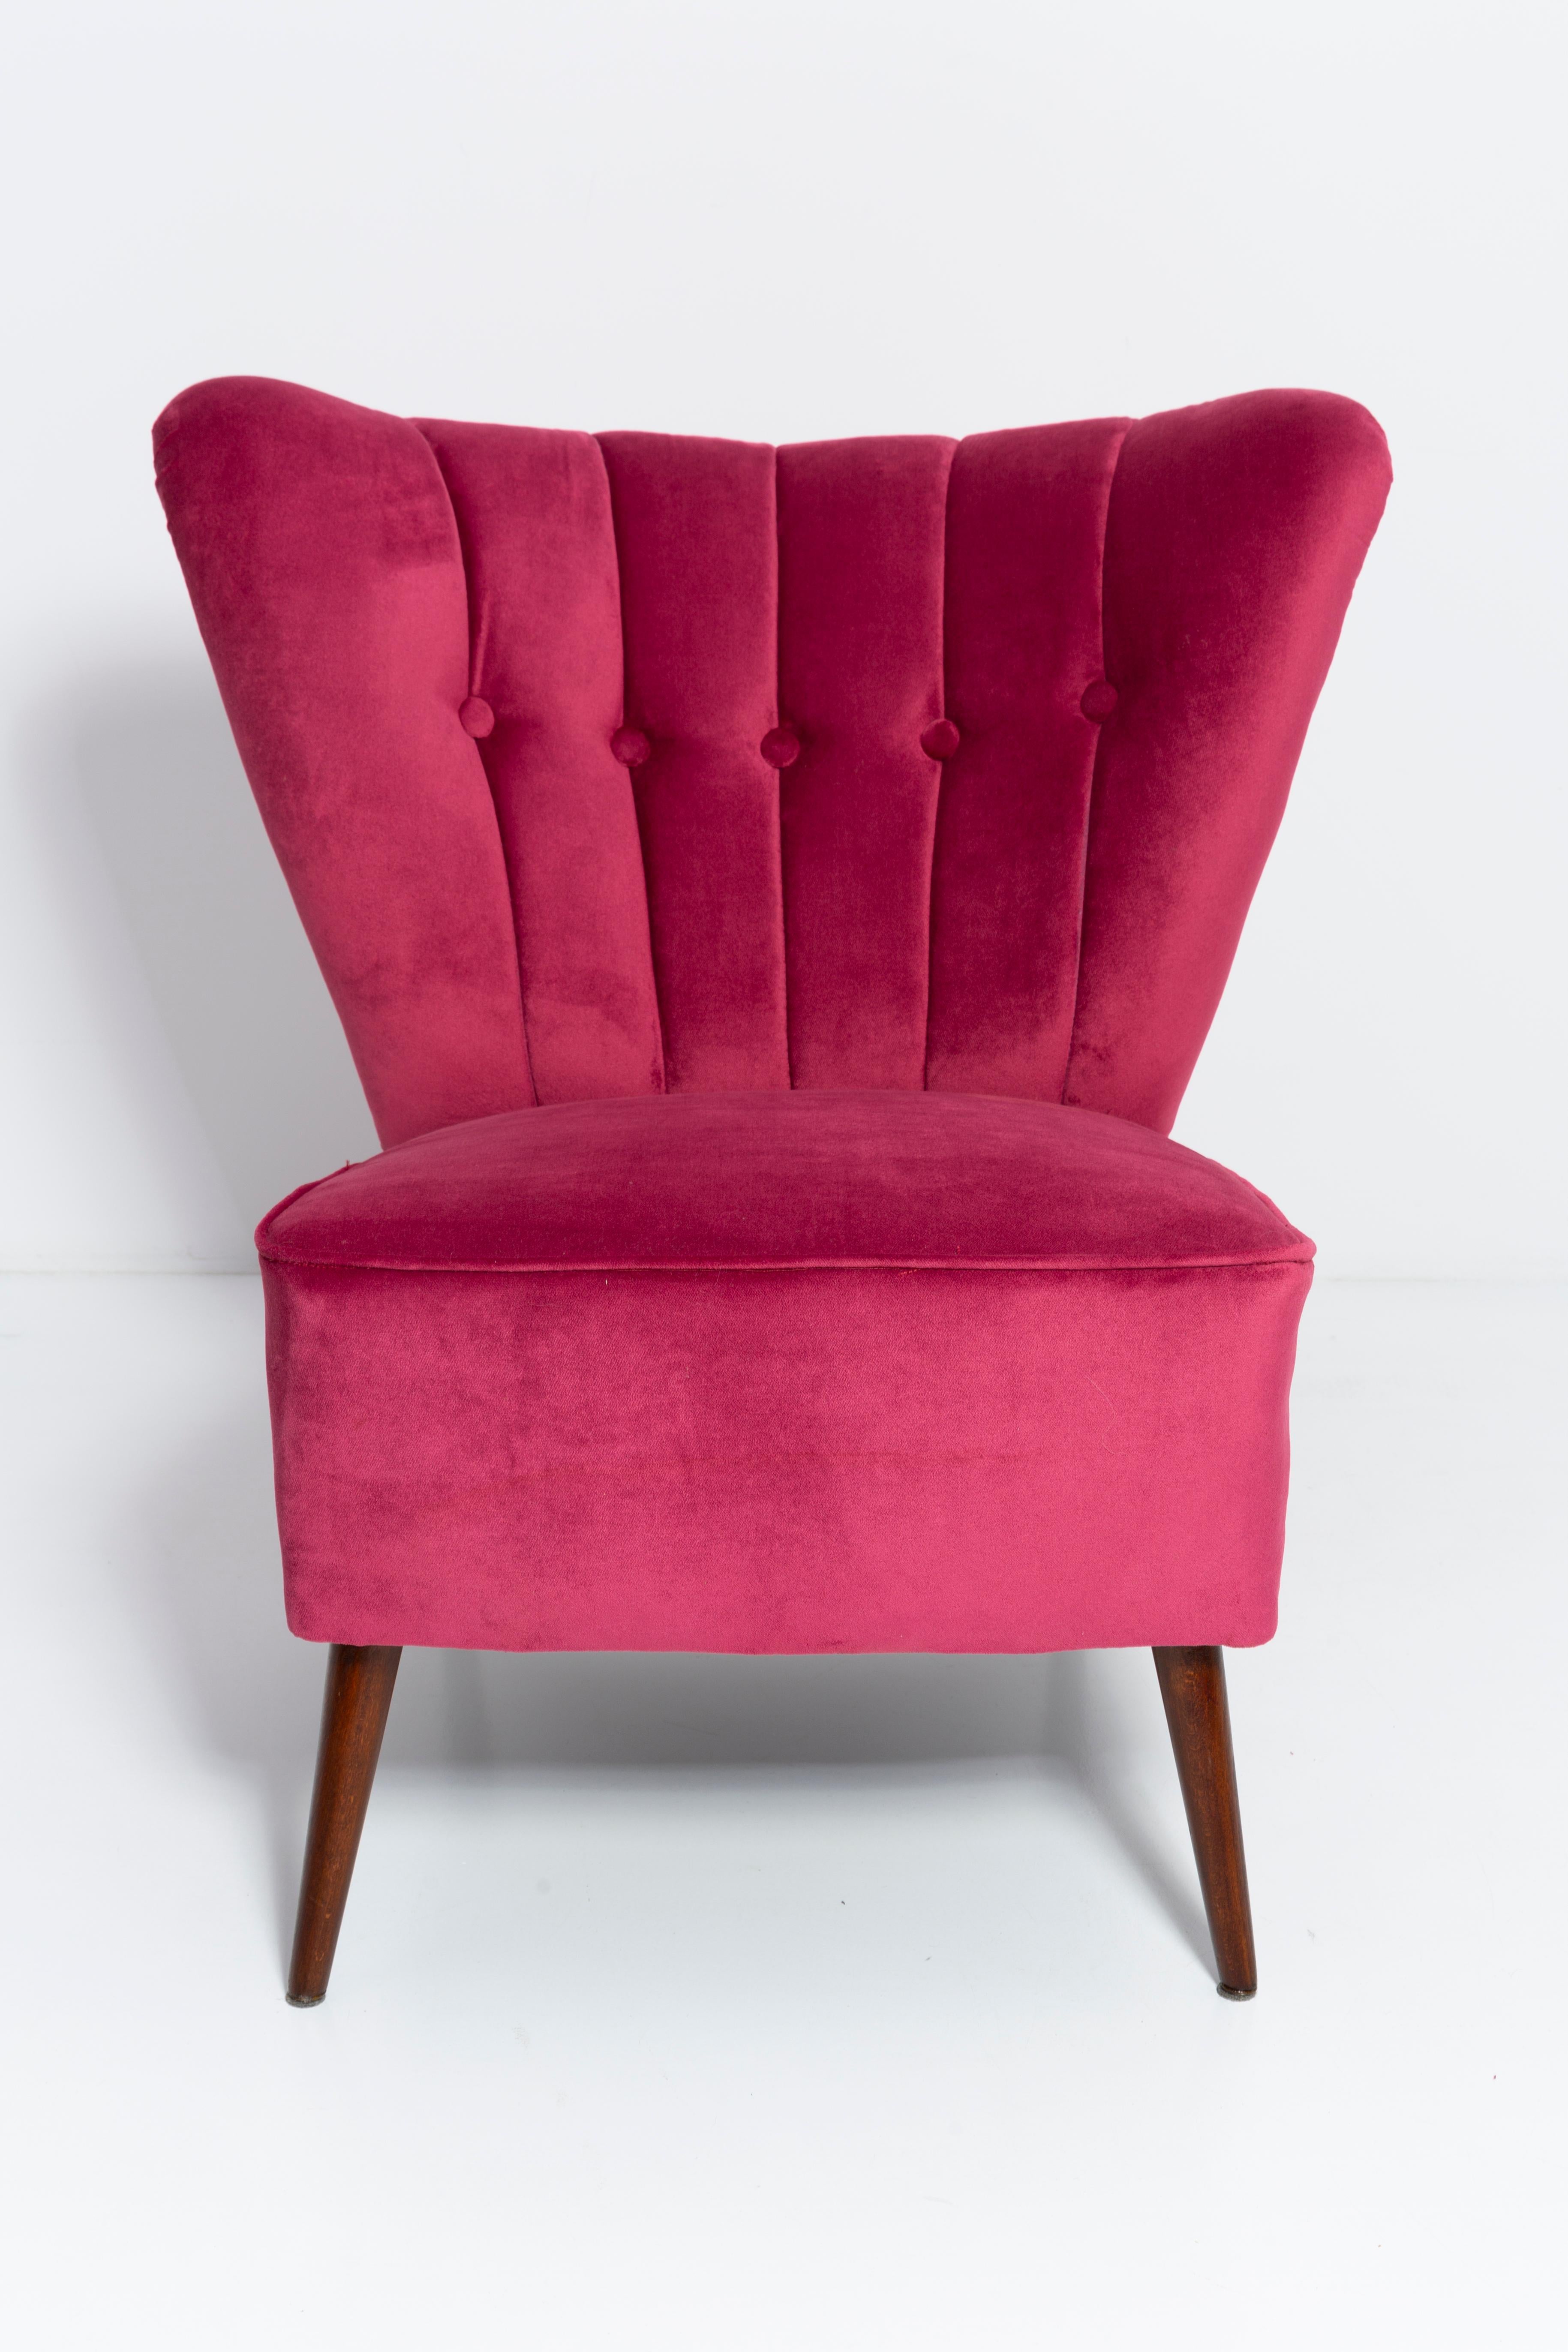 Four Midcentury Magenta Pink Velvet Club Armchairs, Europe, 1960s For Sale 1